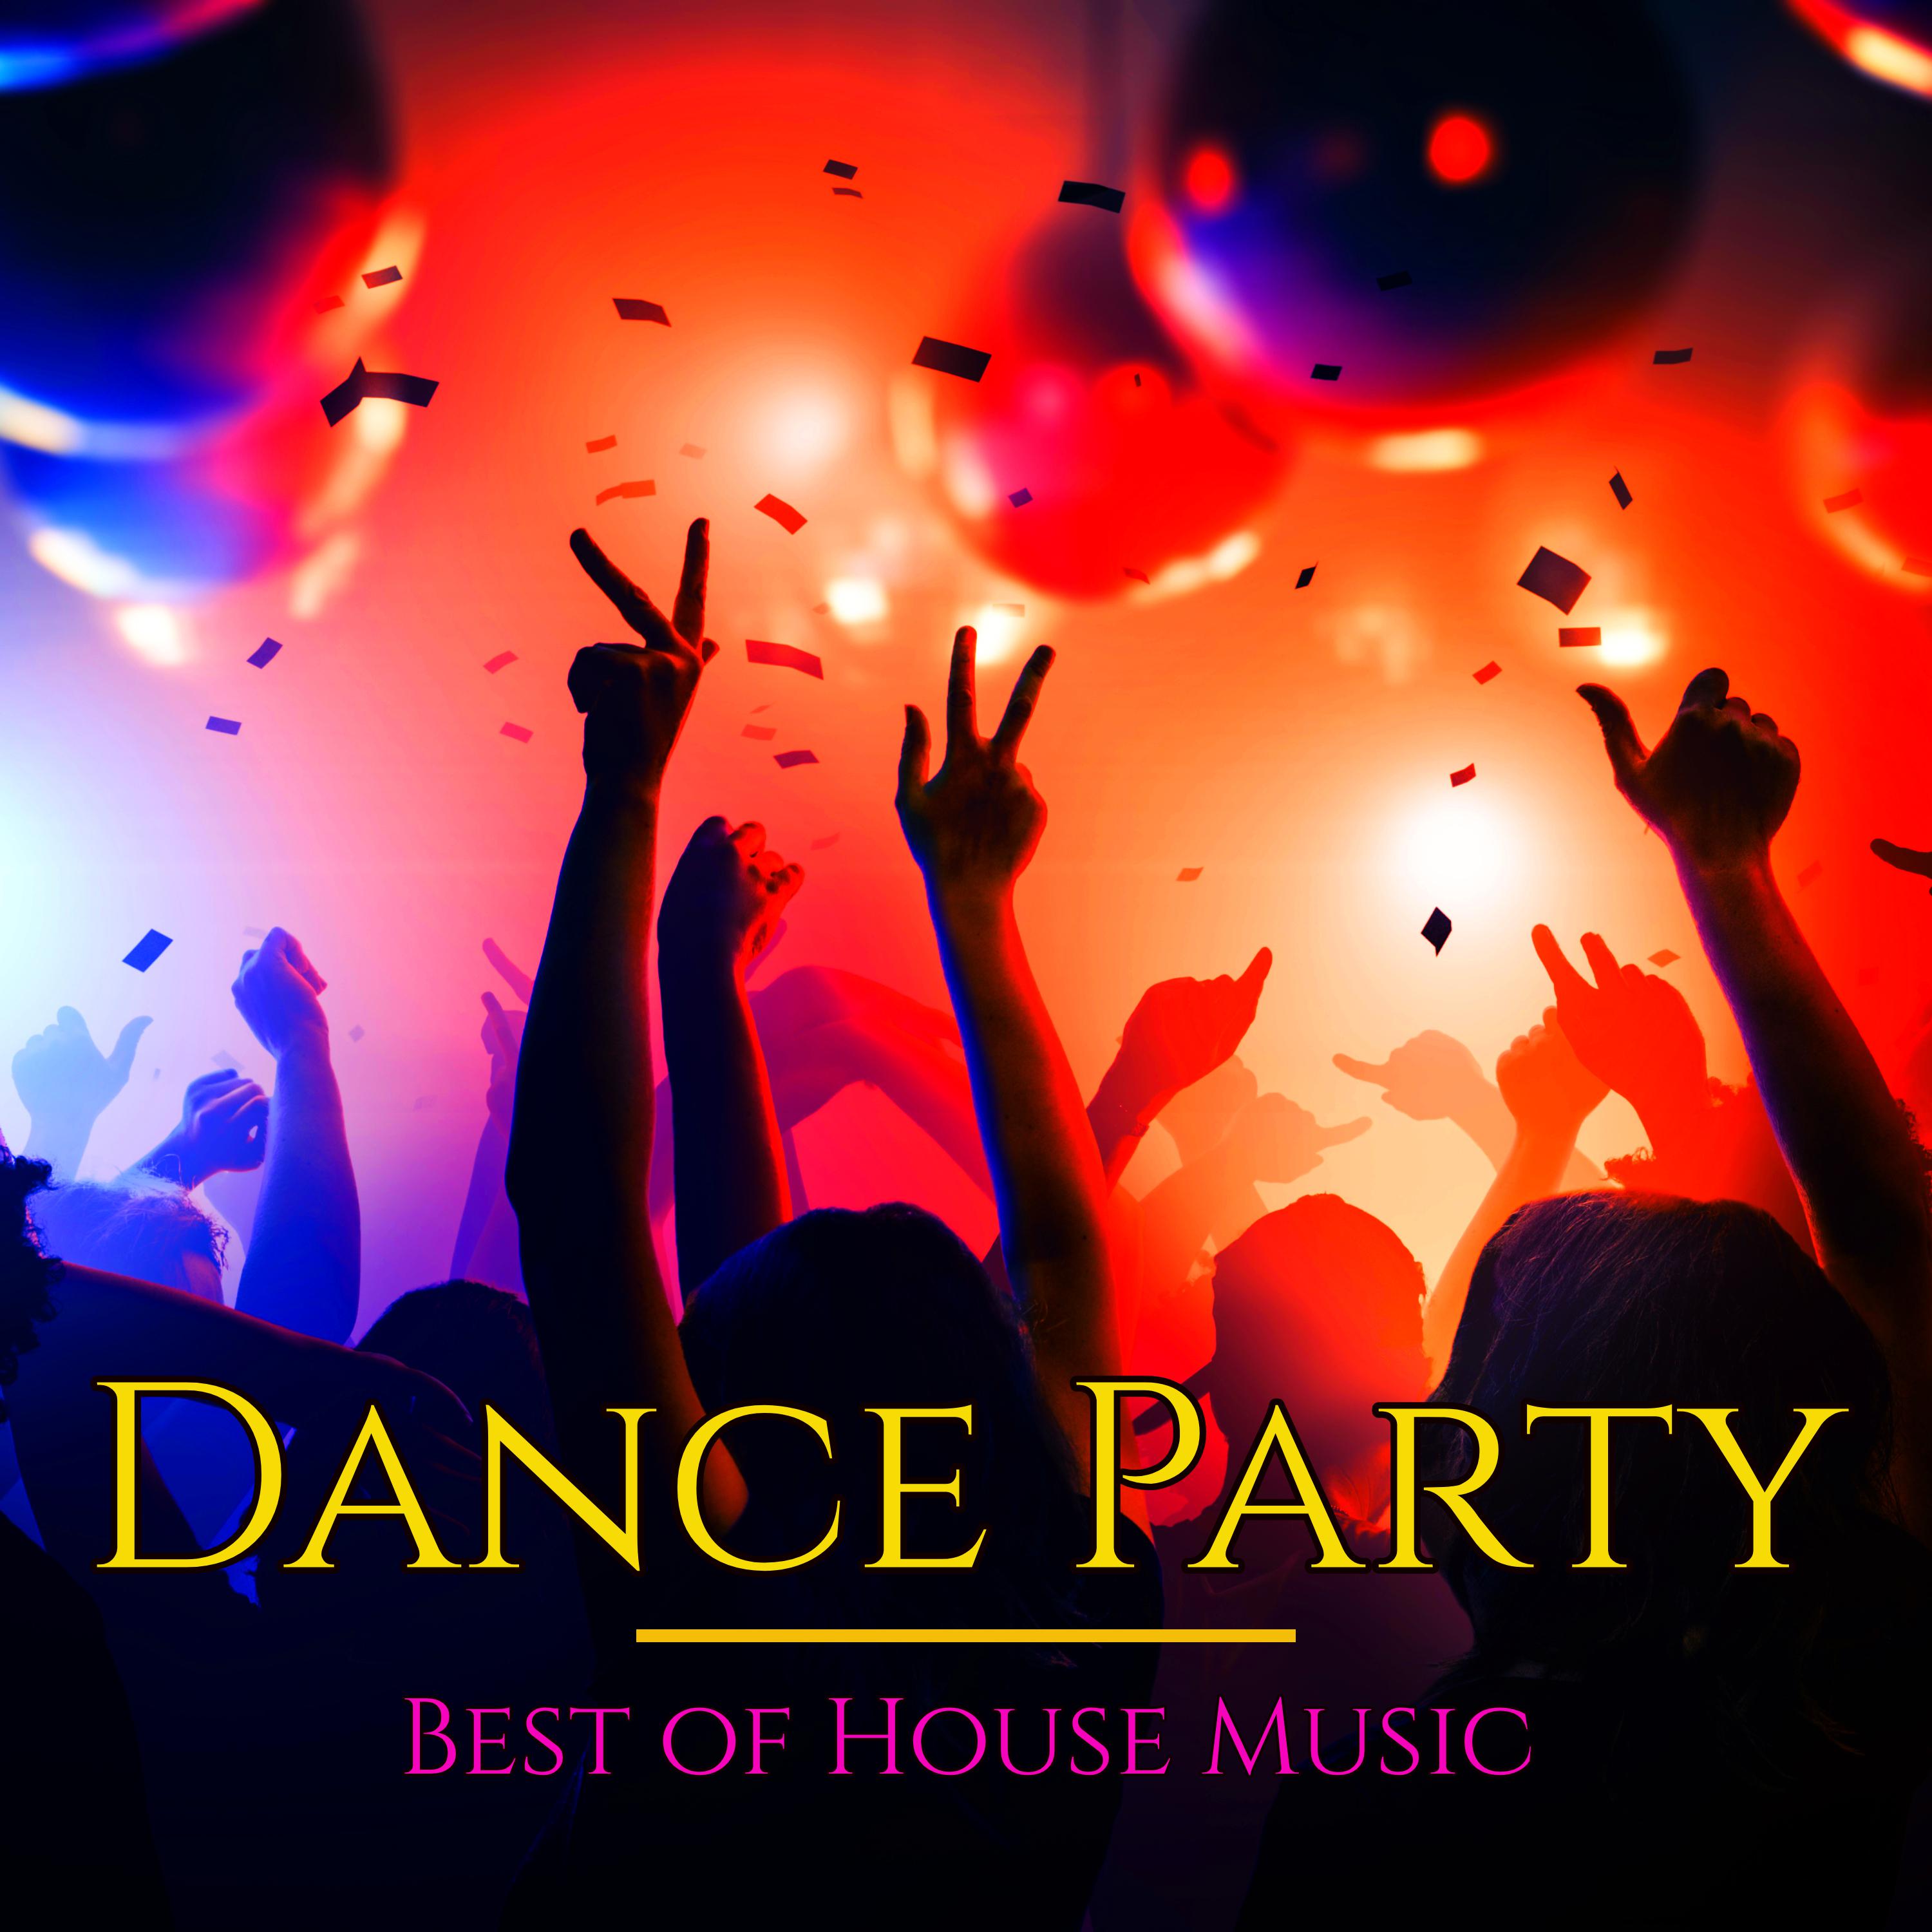 Dance Party – Best of House Music